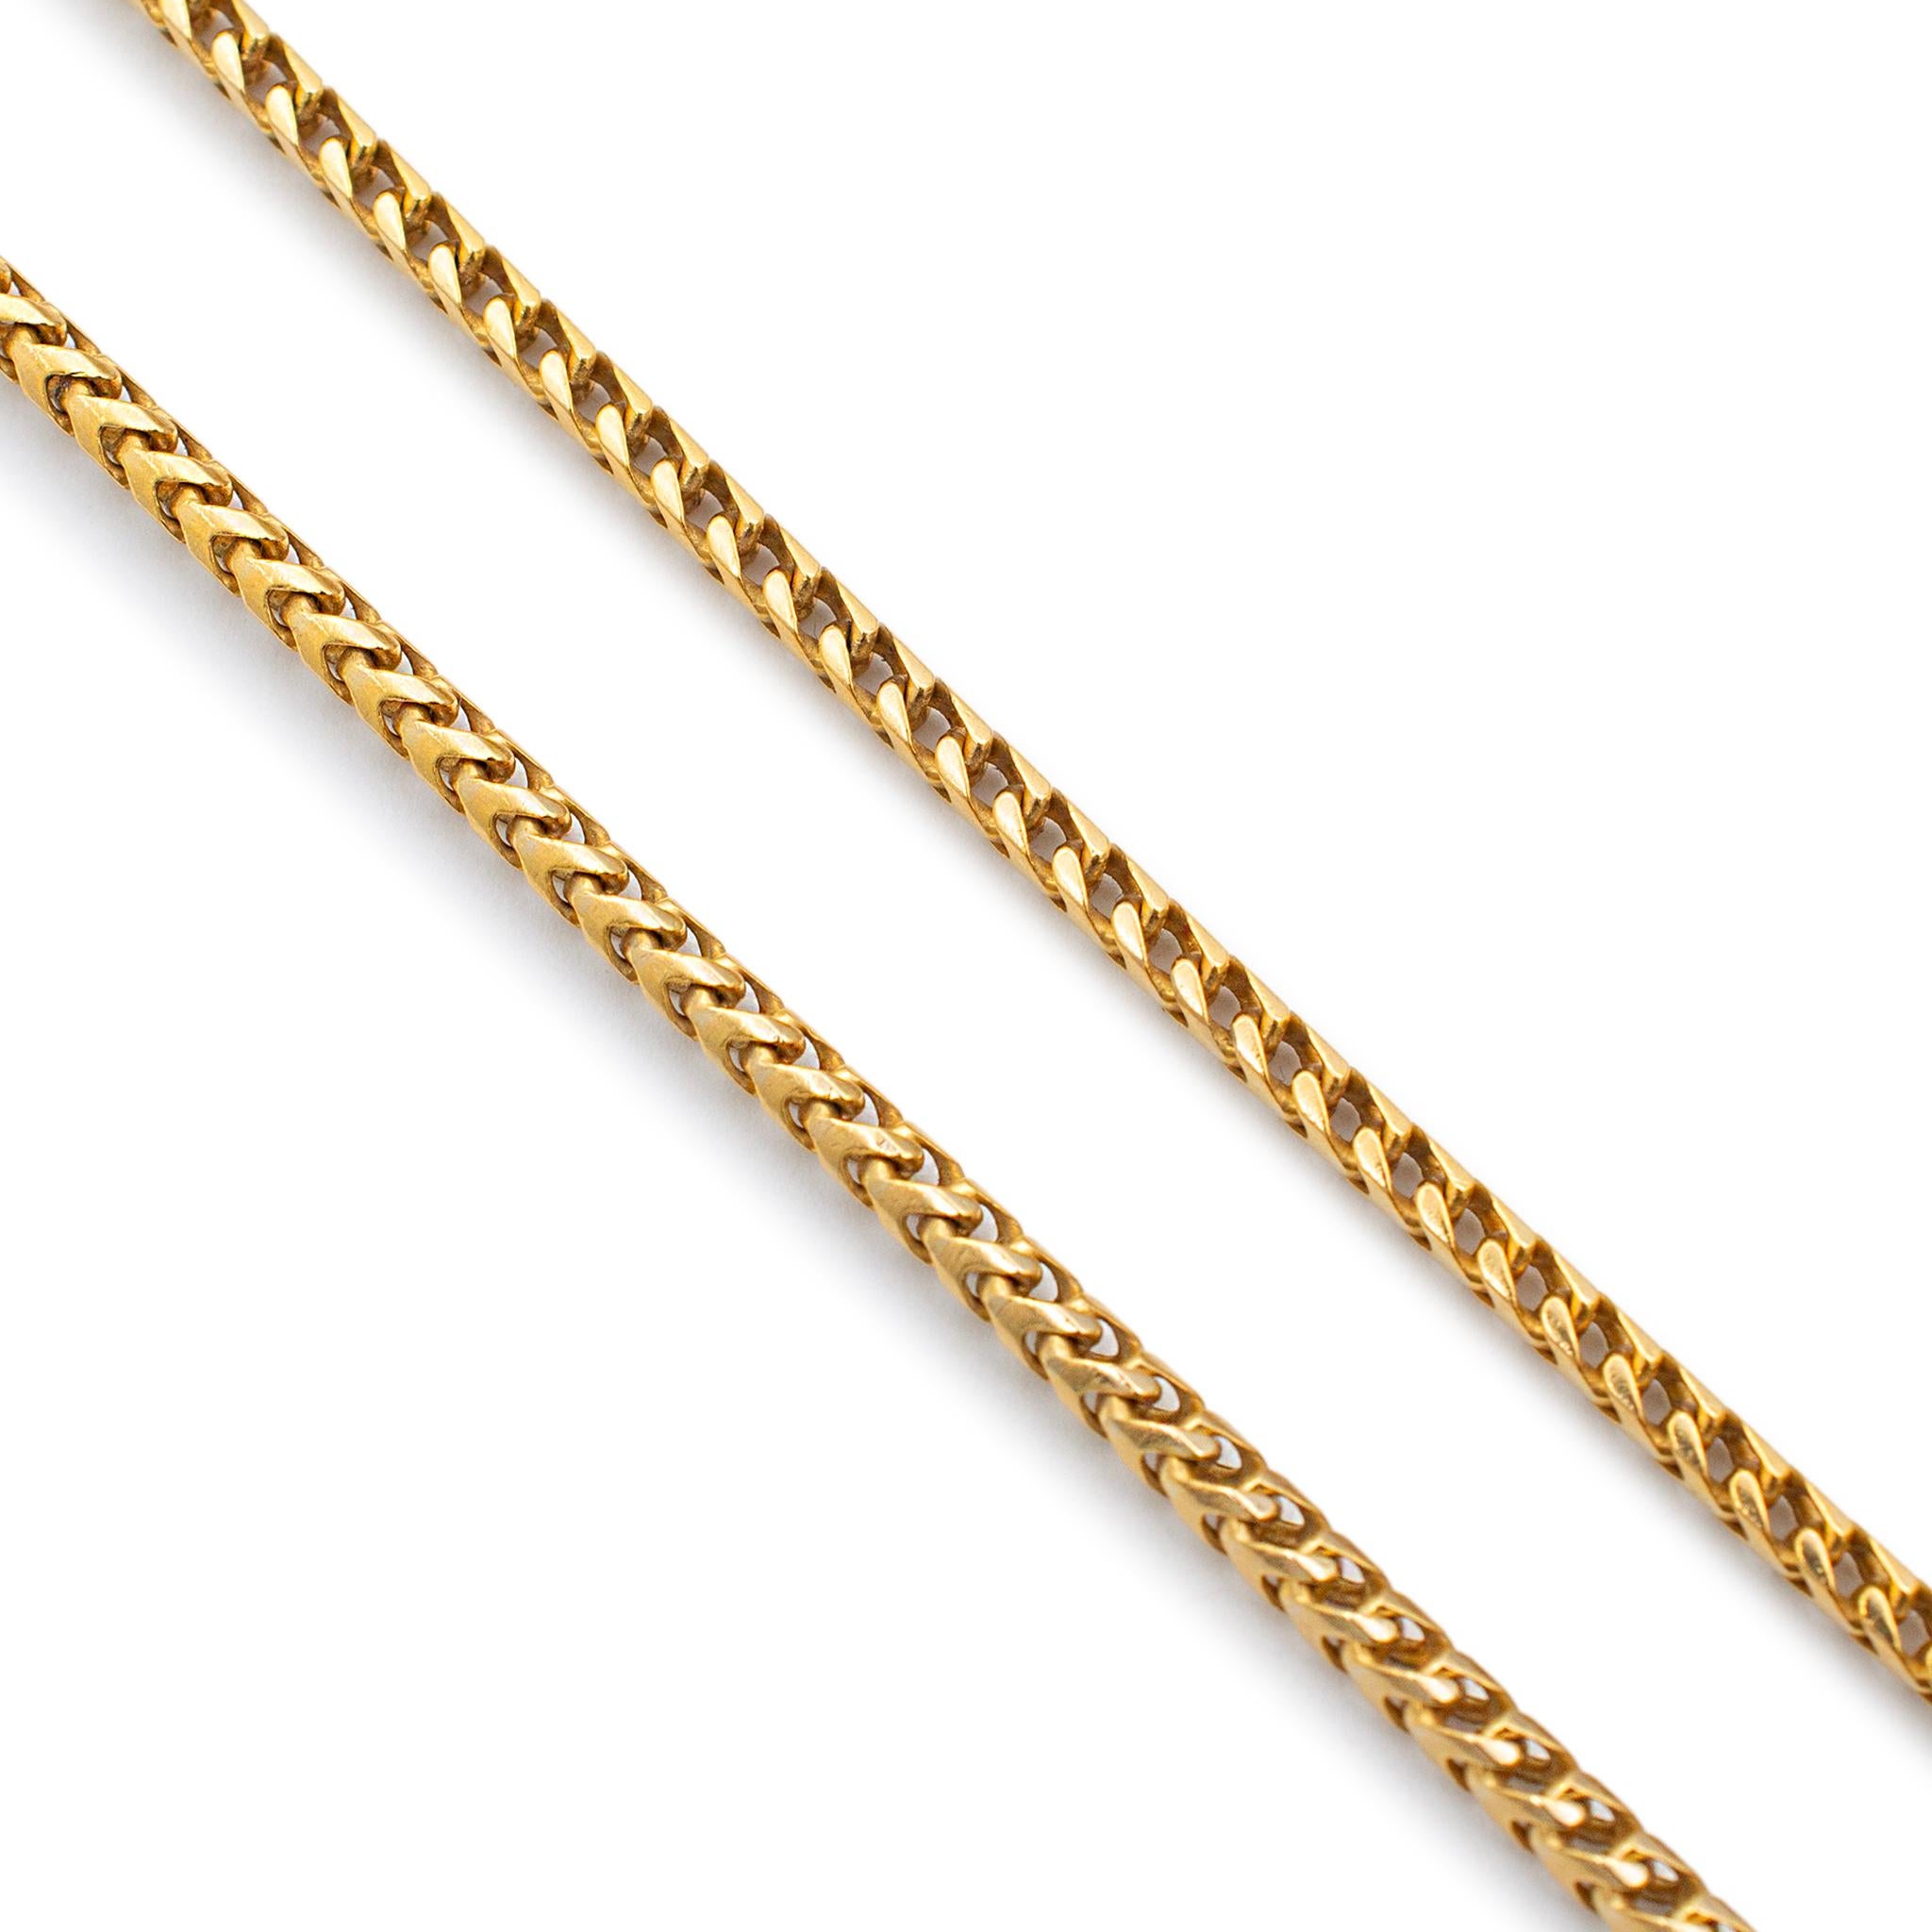 Gender: Unisex

Metal Type: 14K Yellow Gold

Length: 28.00 Inches

Width: 2.50 mm

Weight: 25.10 grams

14K yellow gold foxtail link chain. The metal was tested and determined to be 14K yellow gold. Engraved with 